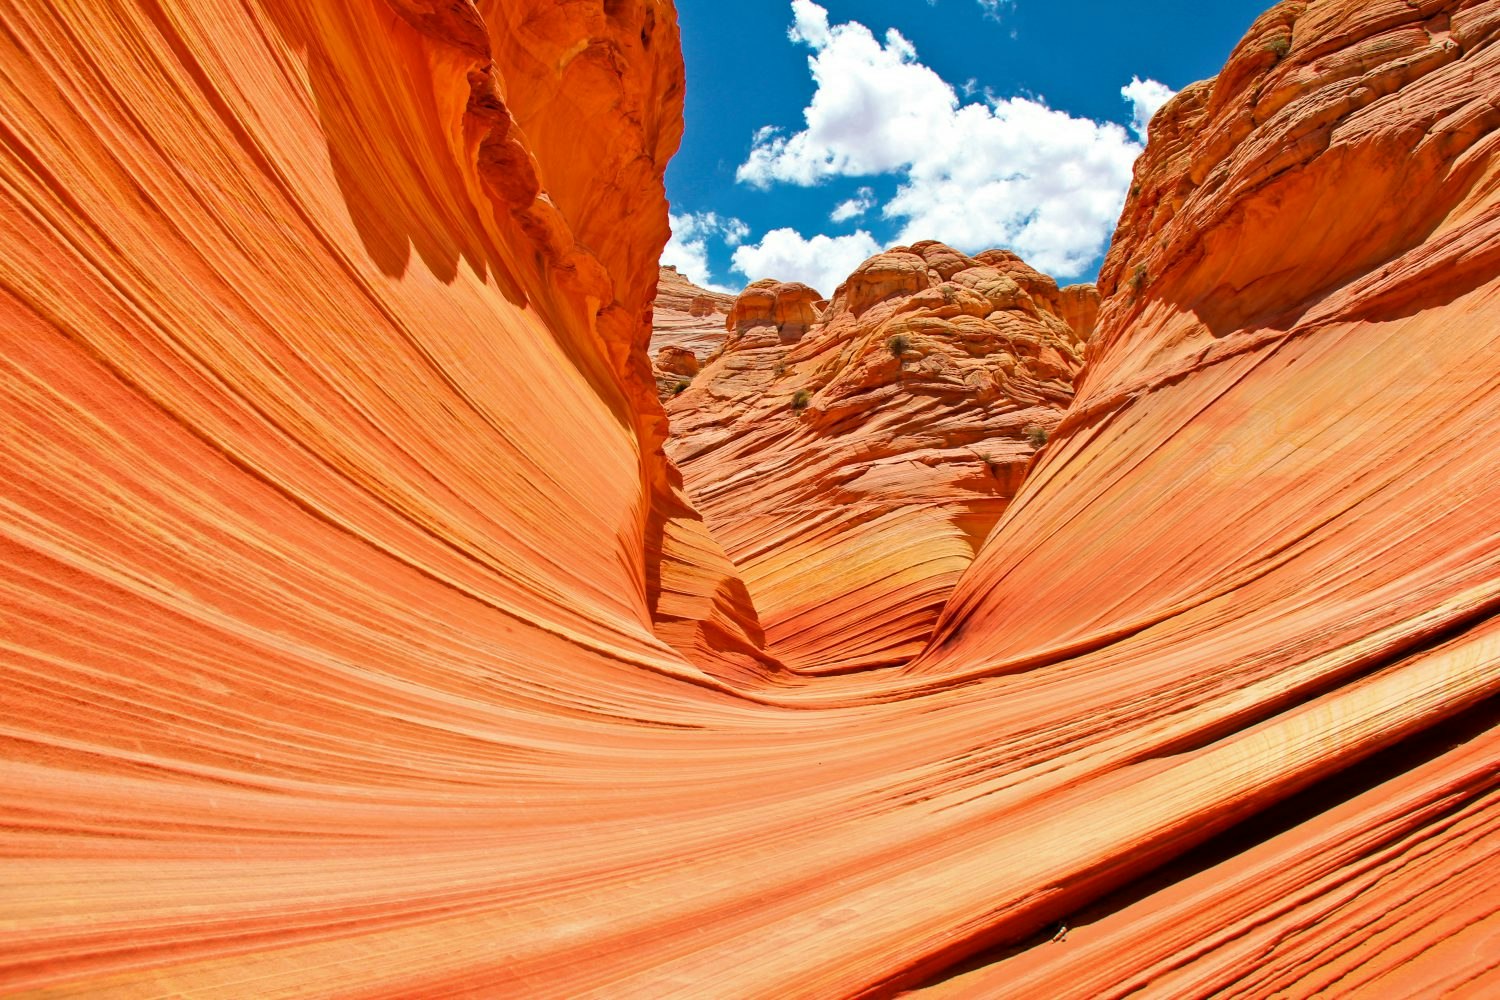 The Wave is located in the desert close the border of Arizona and Utah.